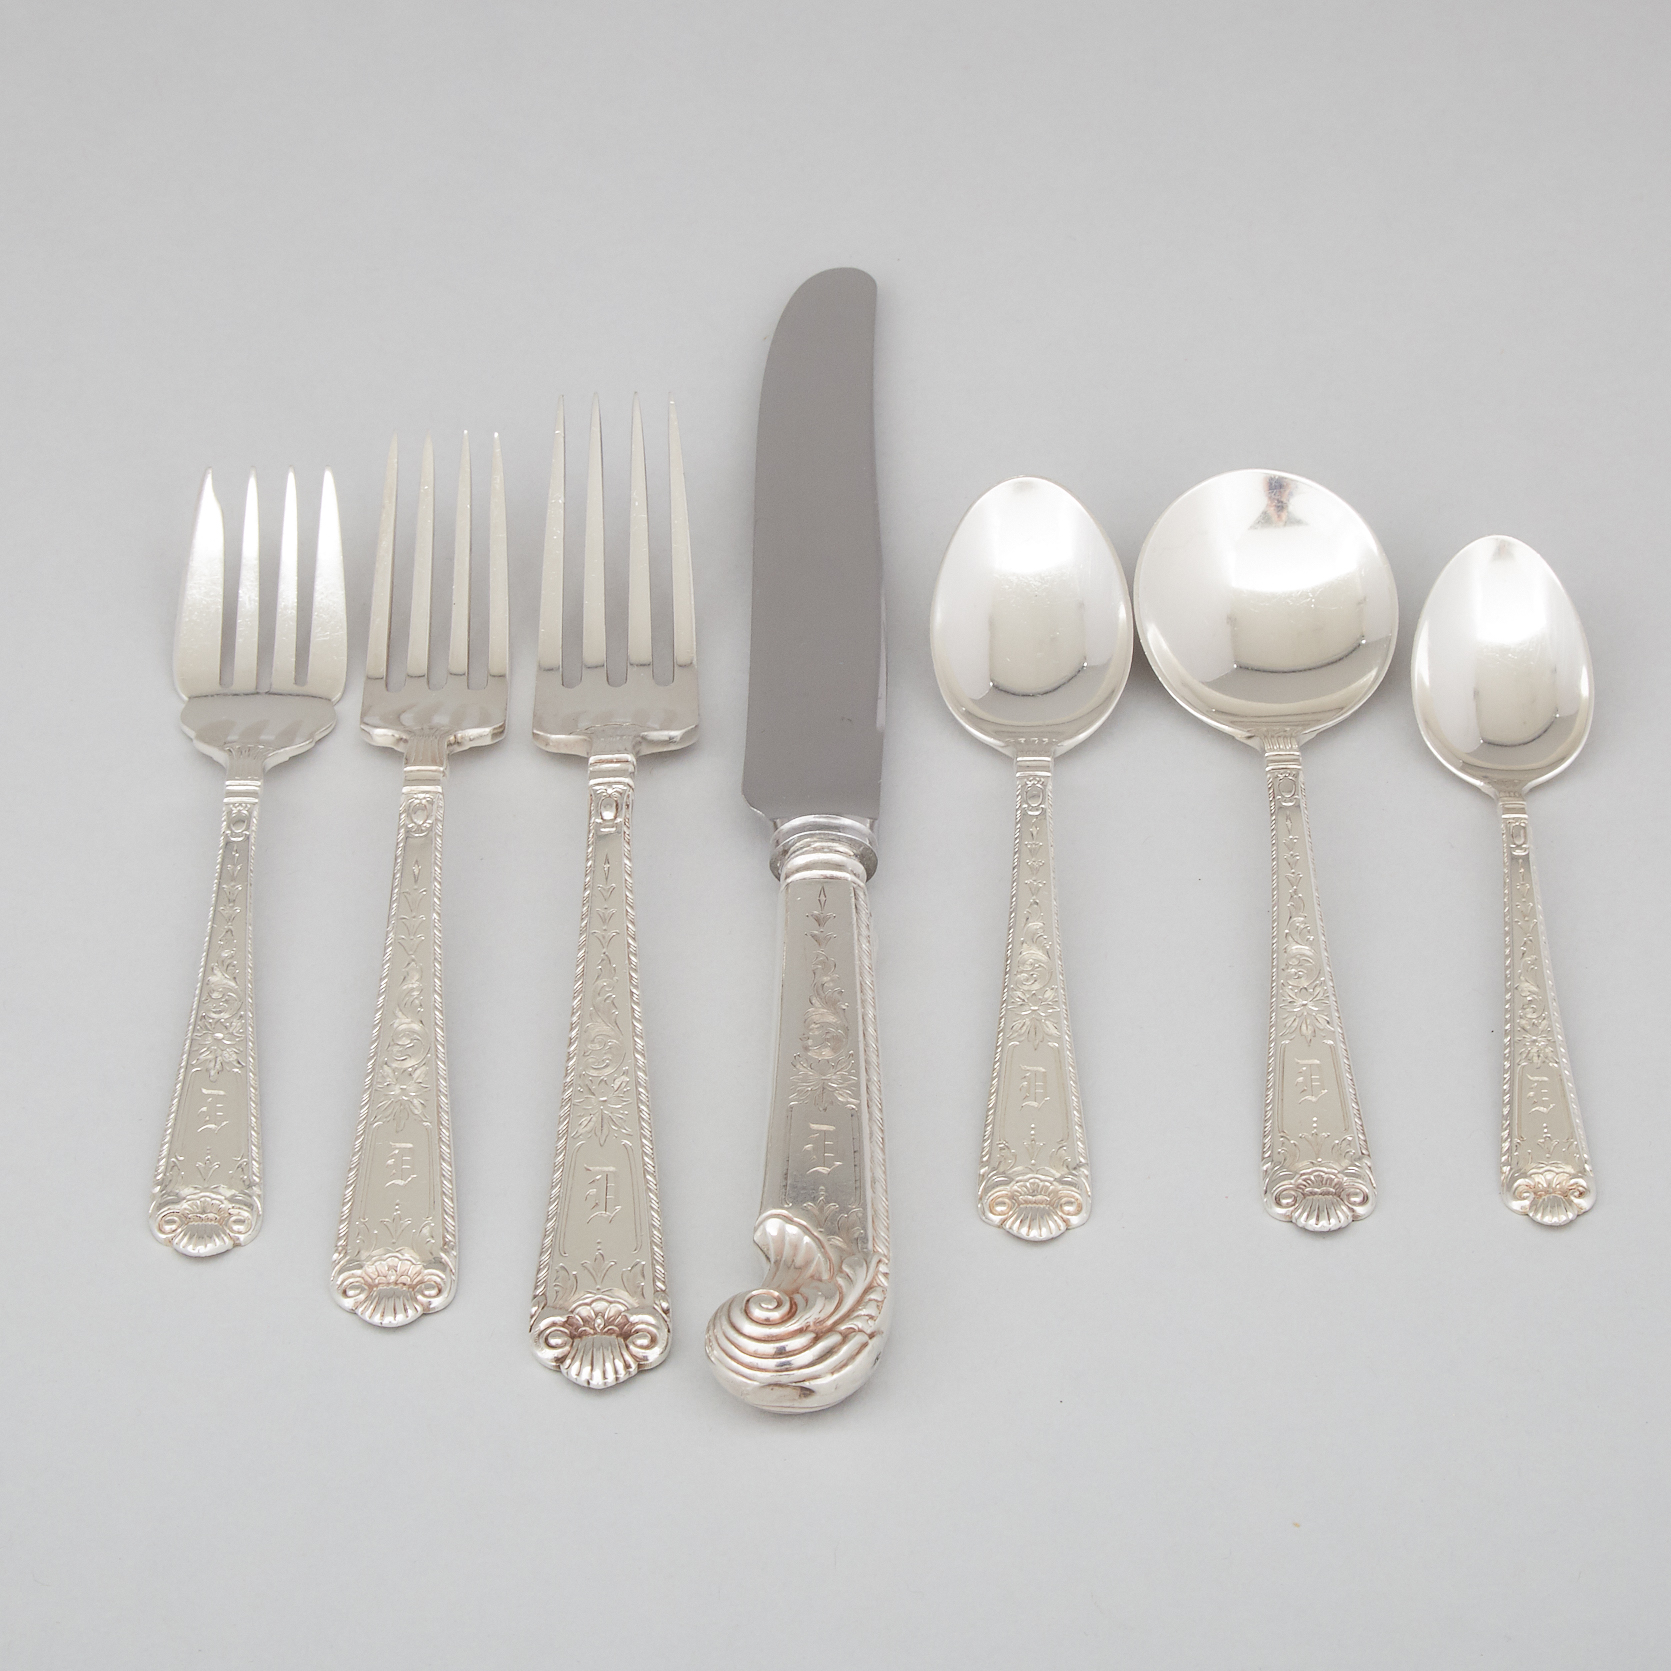 Canadian Silver ‘George II Engraved’ Pattern Flatware Service, Henry Birks & Sons, Montreal, Que., 20th century